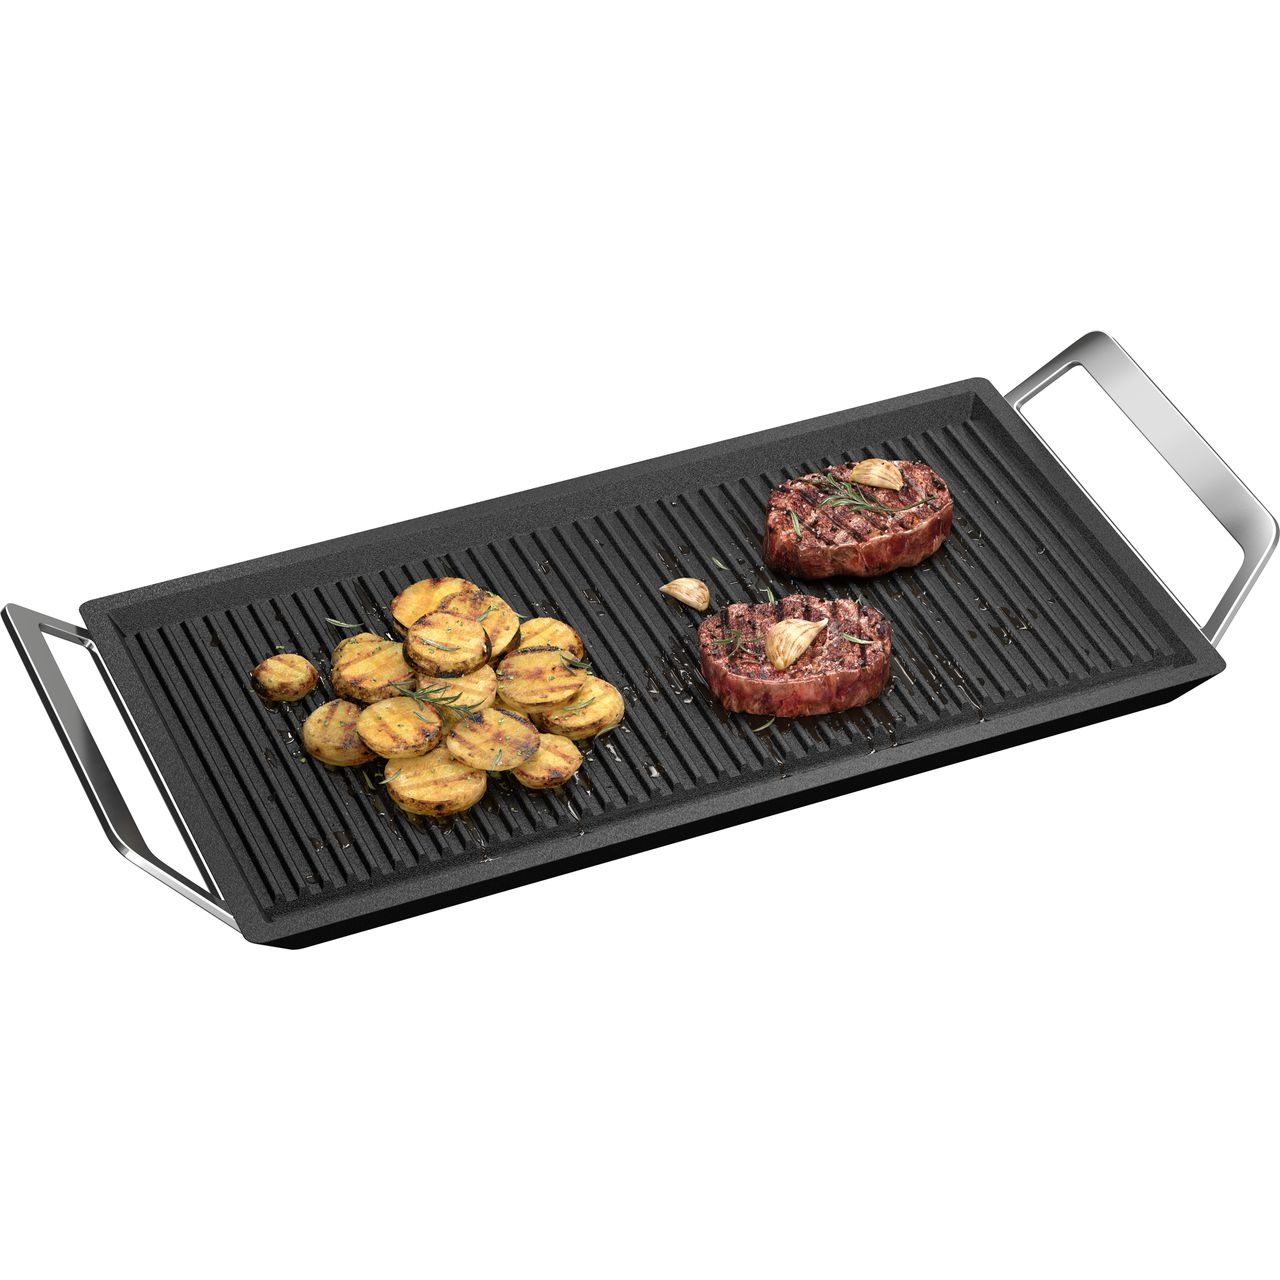 AEG A9HL33 Plancha Grill Review